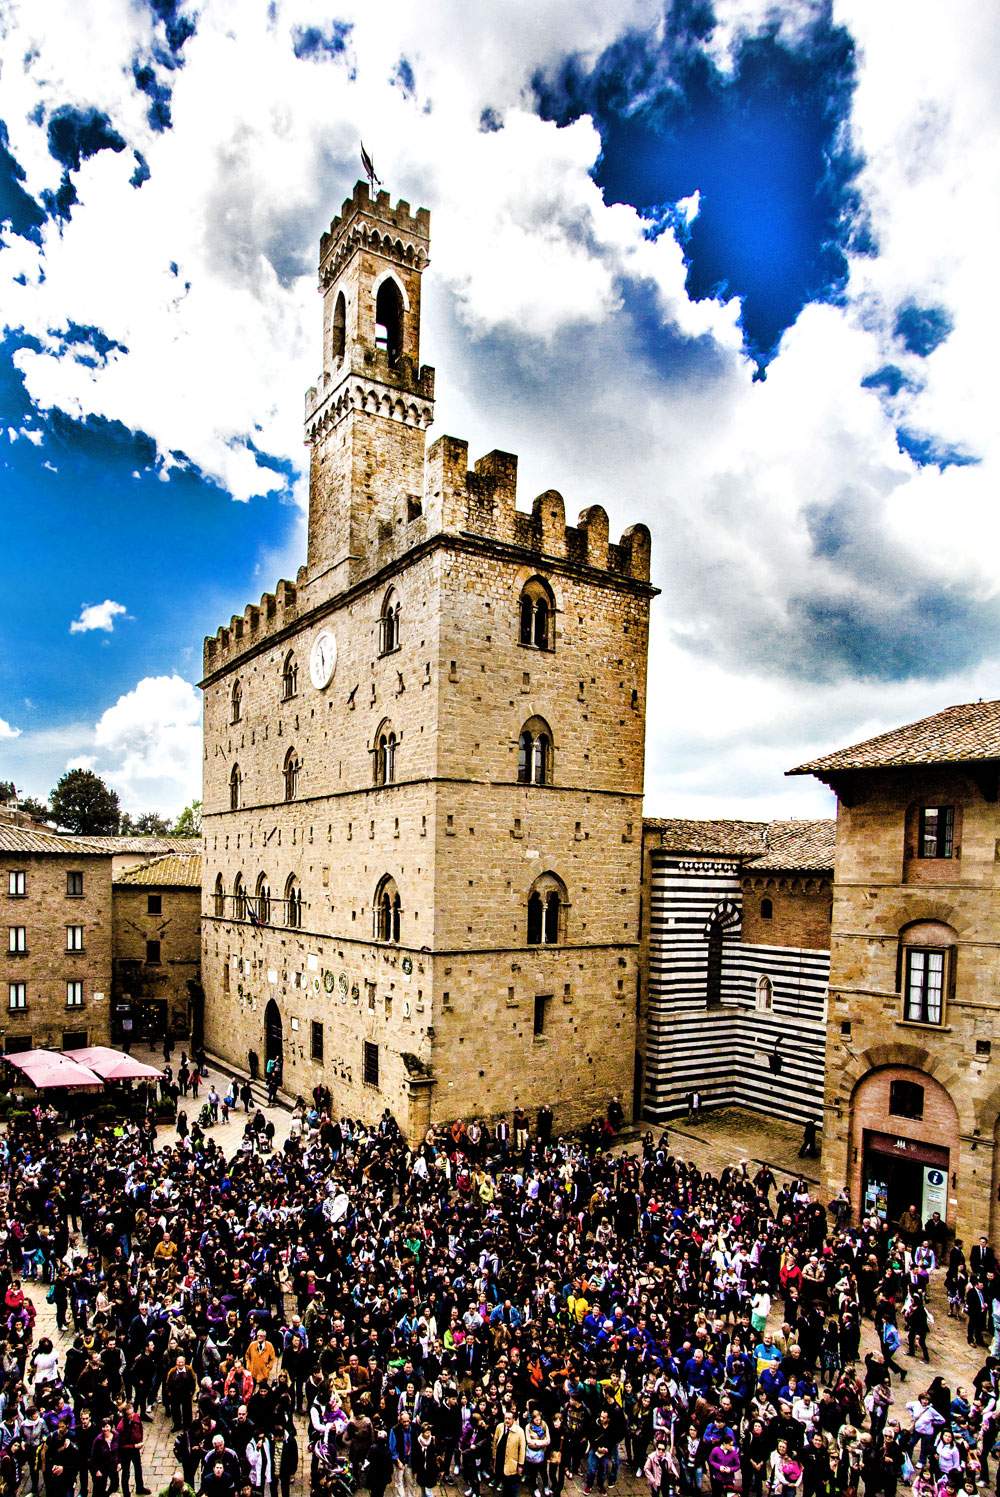 Volterra mayor writes to MiBACT to propose Parma 2021 and a pact among candidate cities